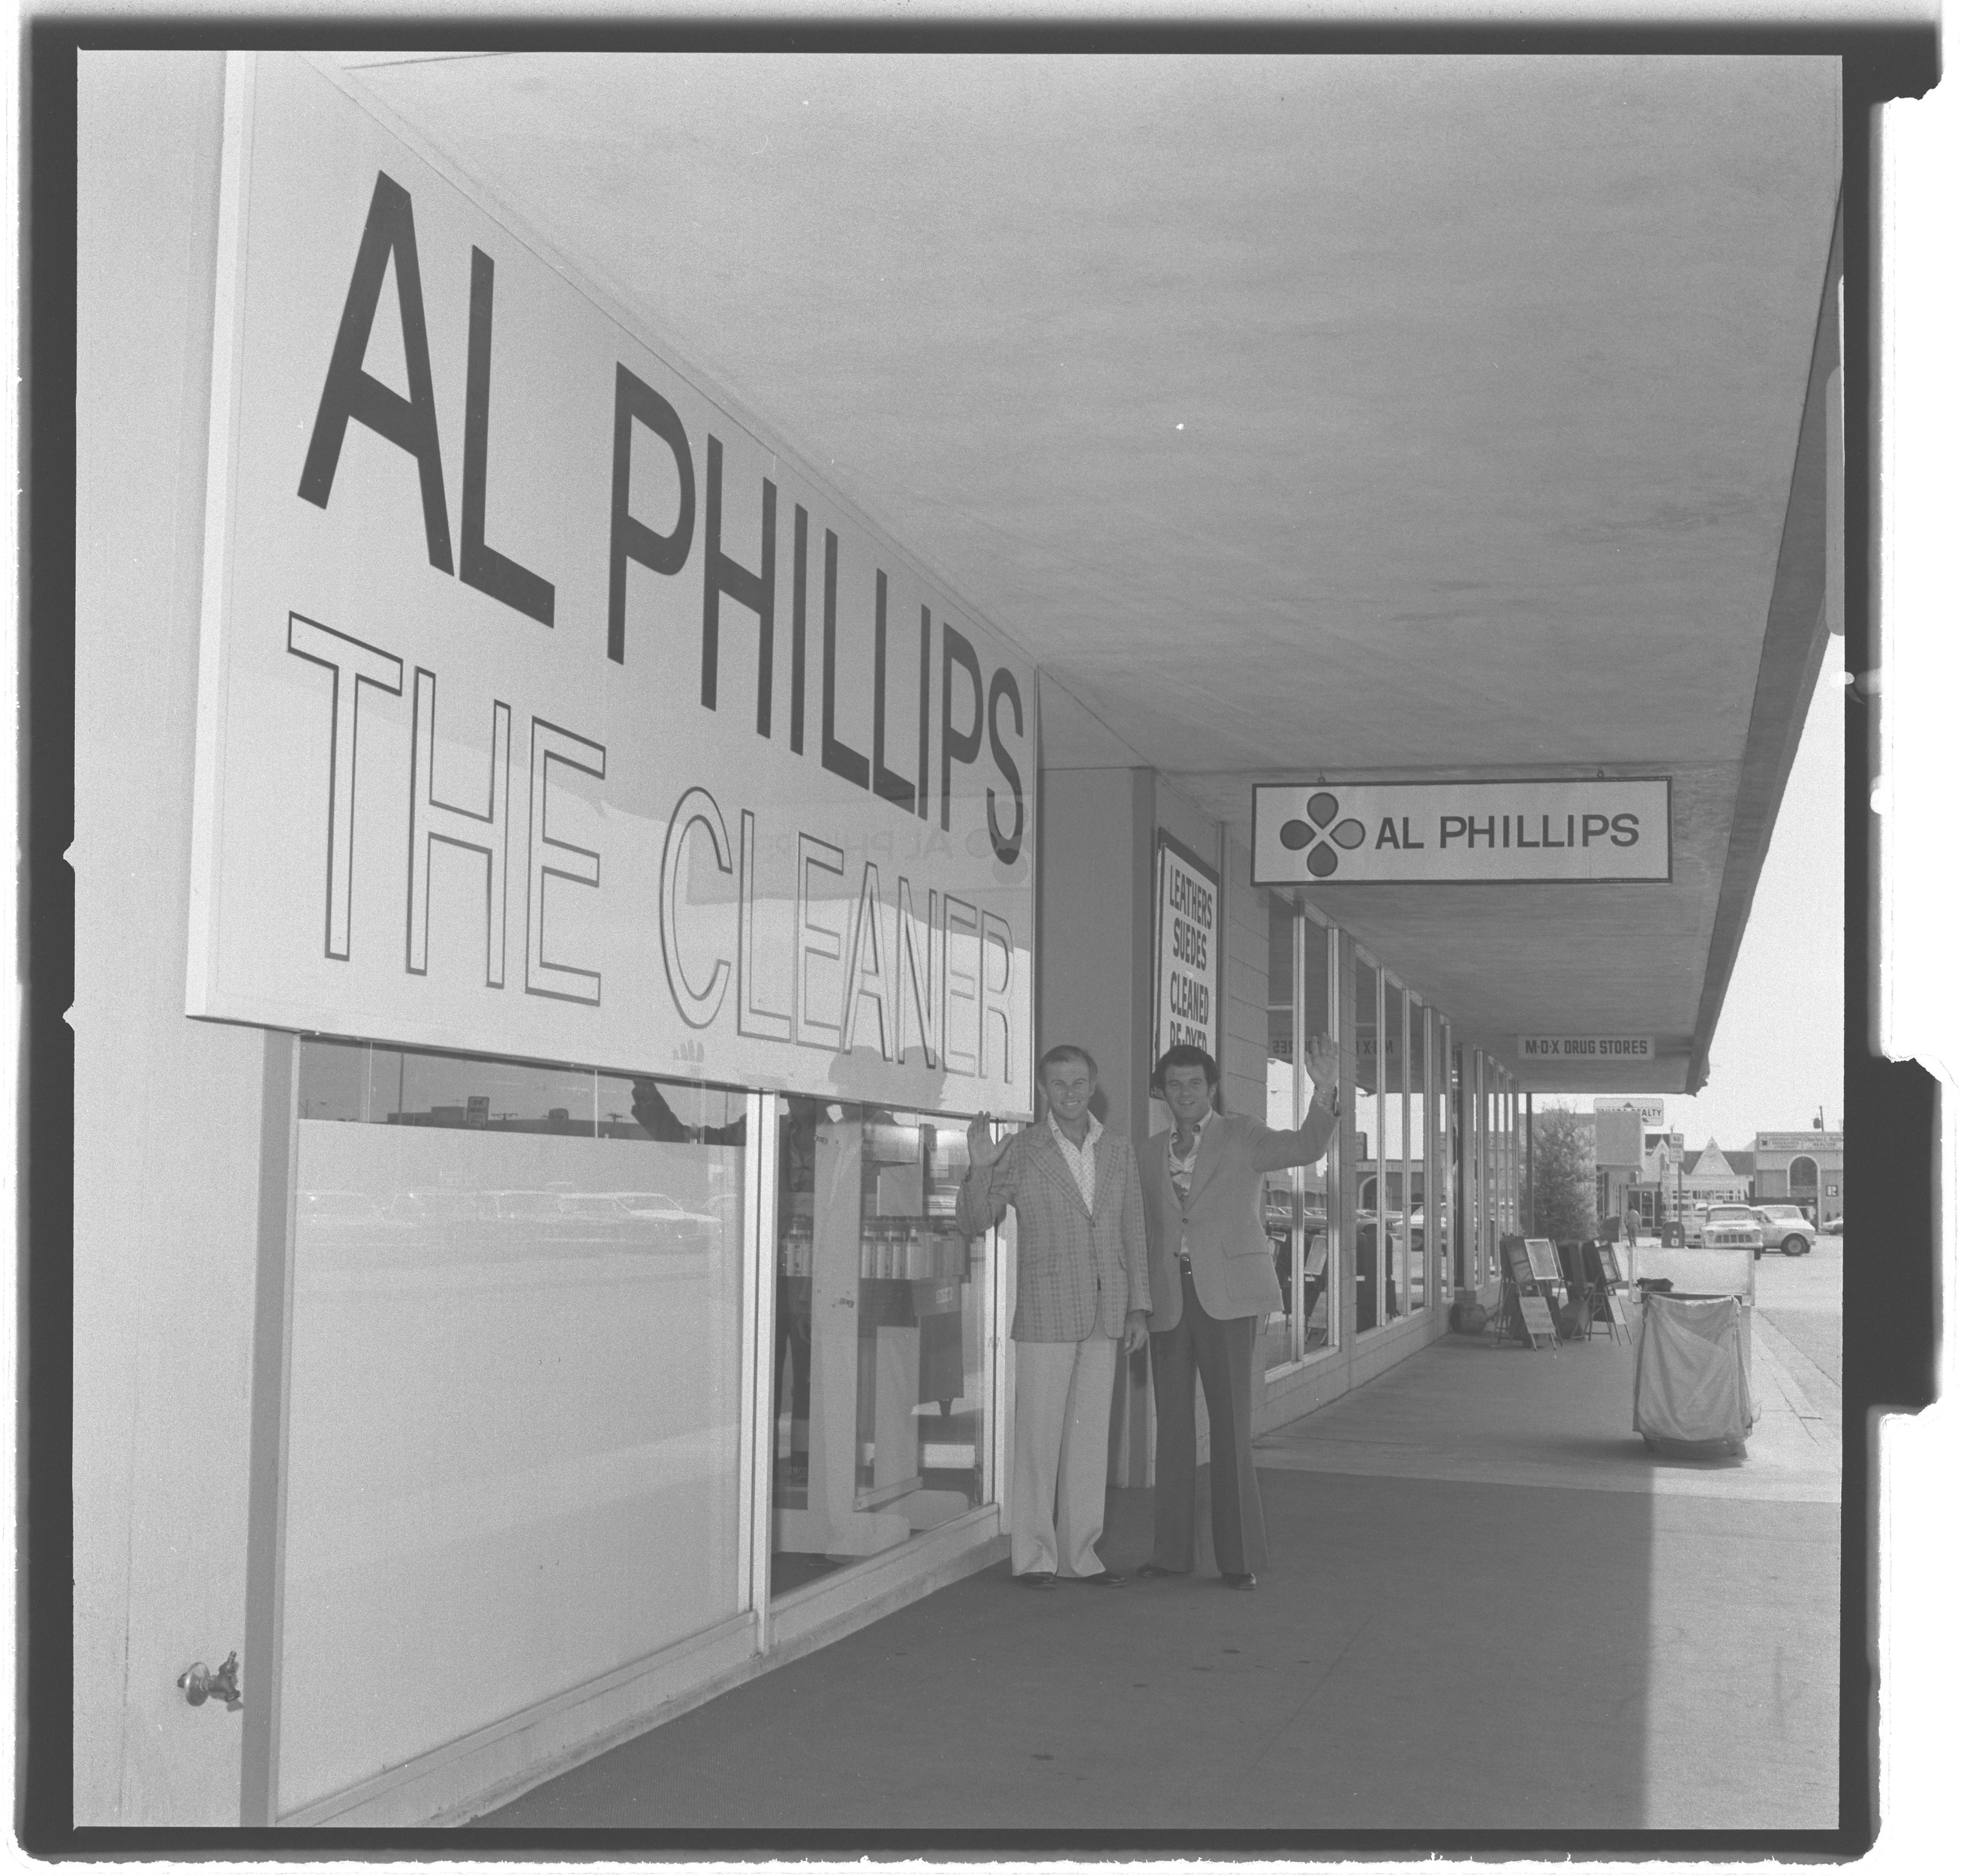 Photographs of Al Phillips Cleaners "The Boys are Back" Publicity, image 04